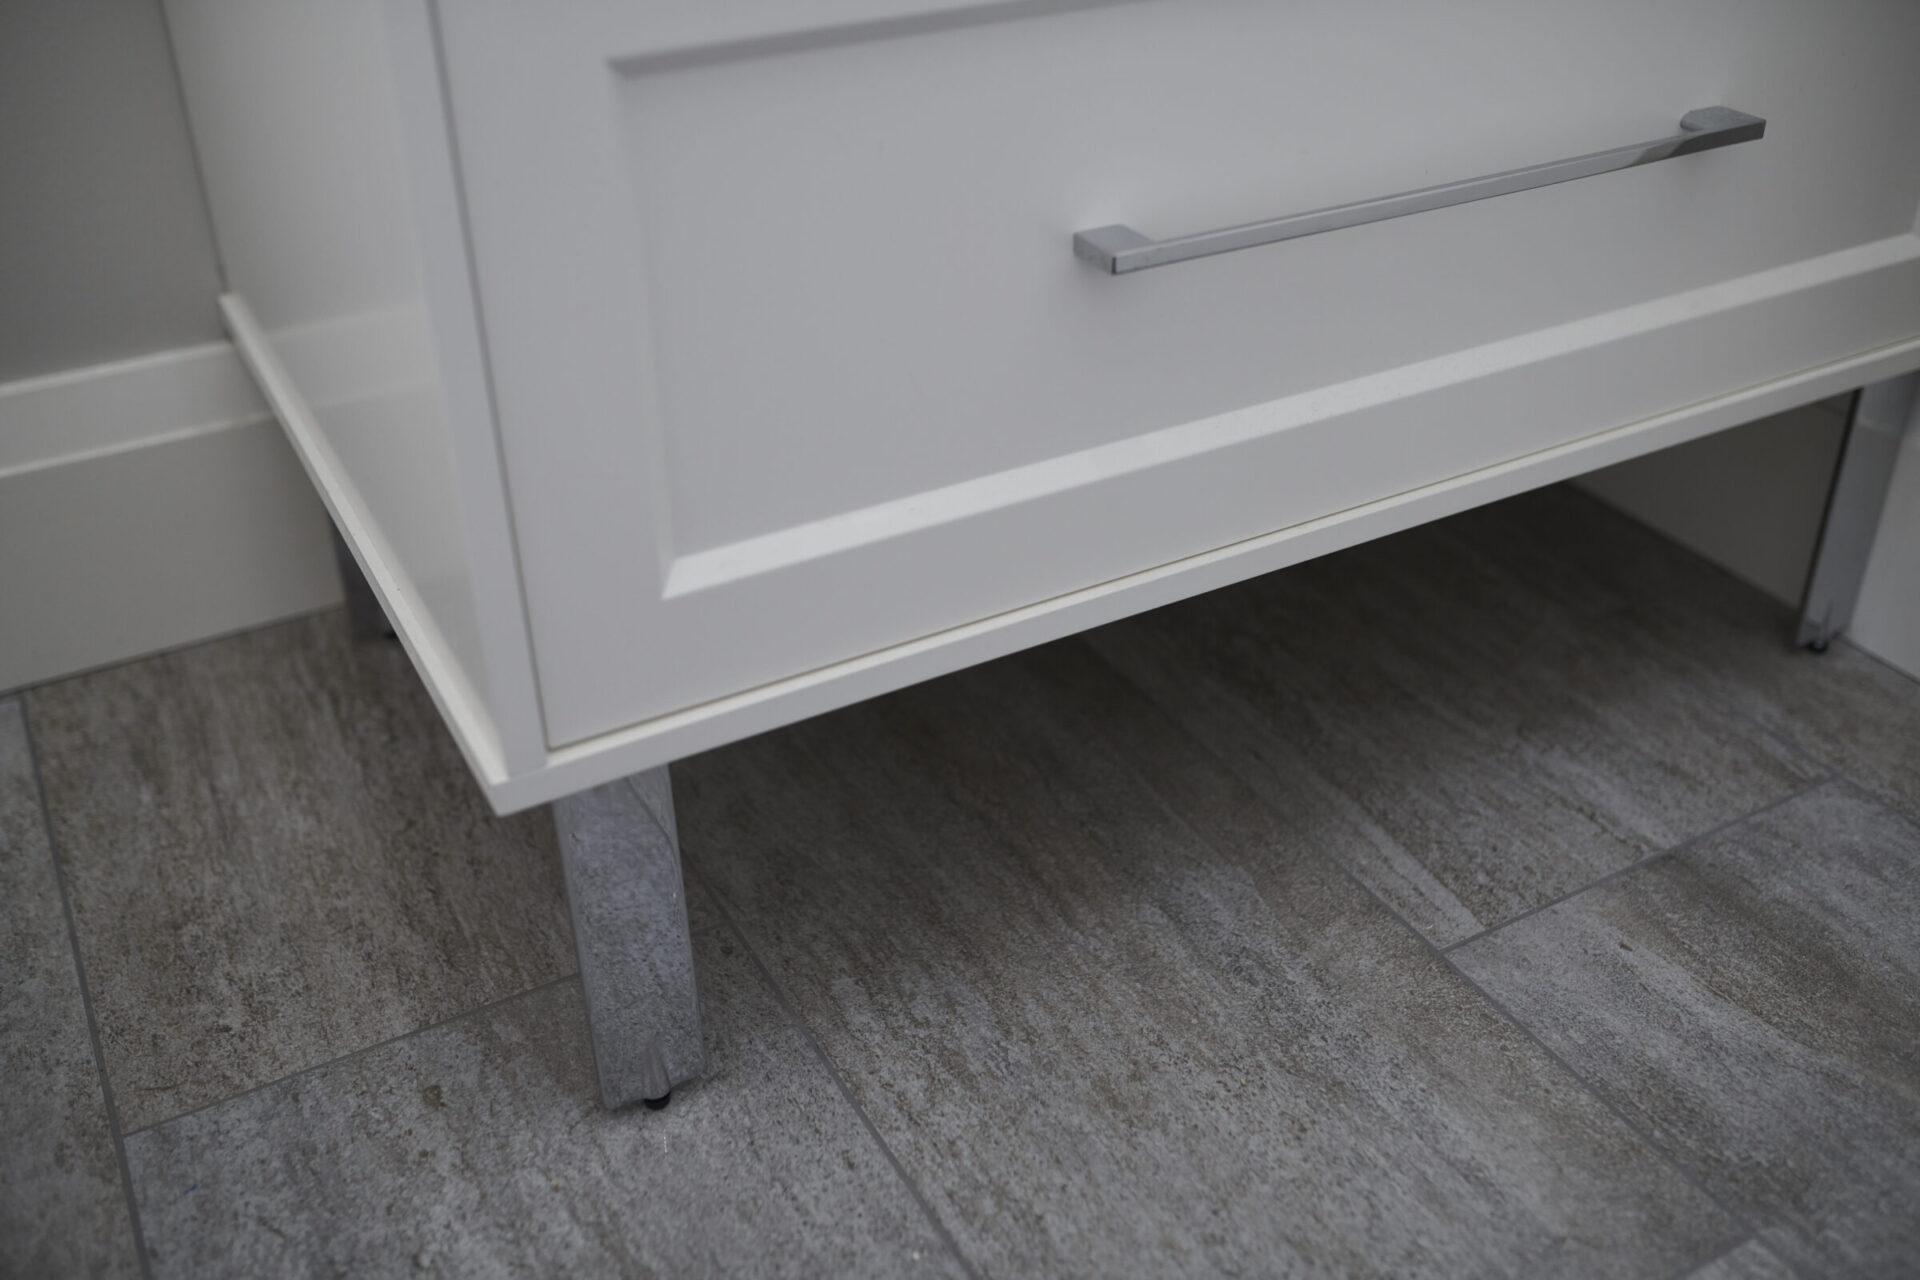 The image shows a close-up of a white cabinet with a metal handle over a gray tiled floor, focusing on the cabinet's base and leg.